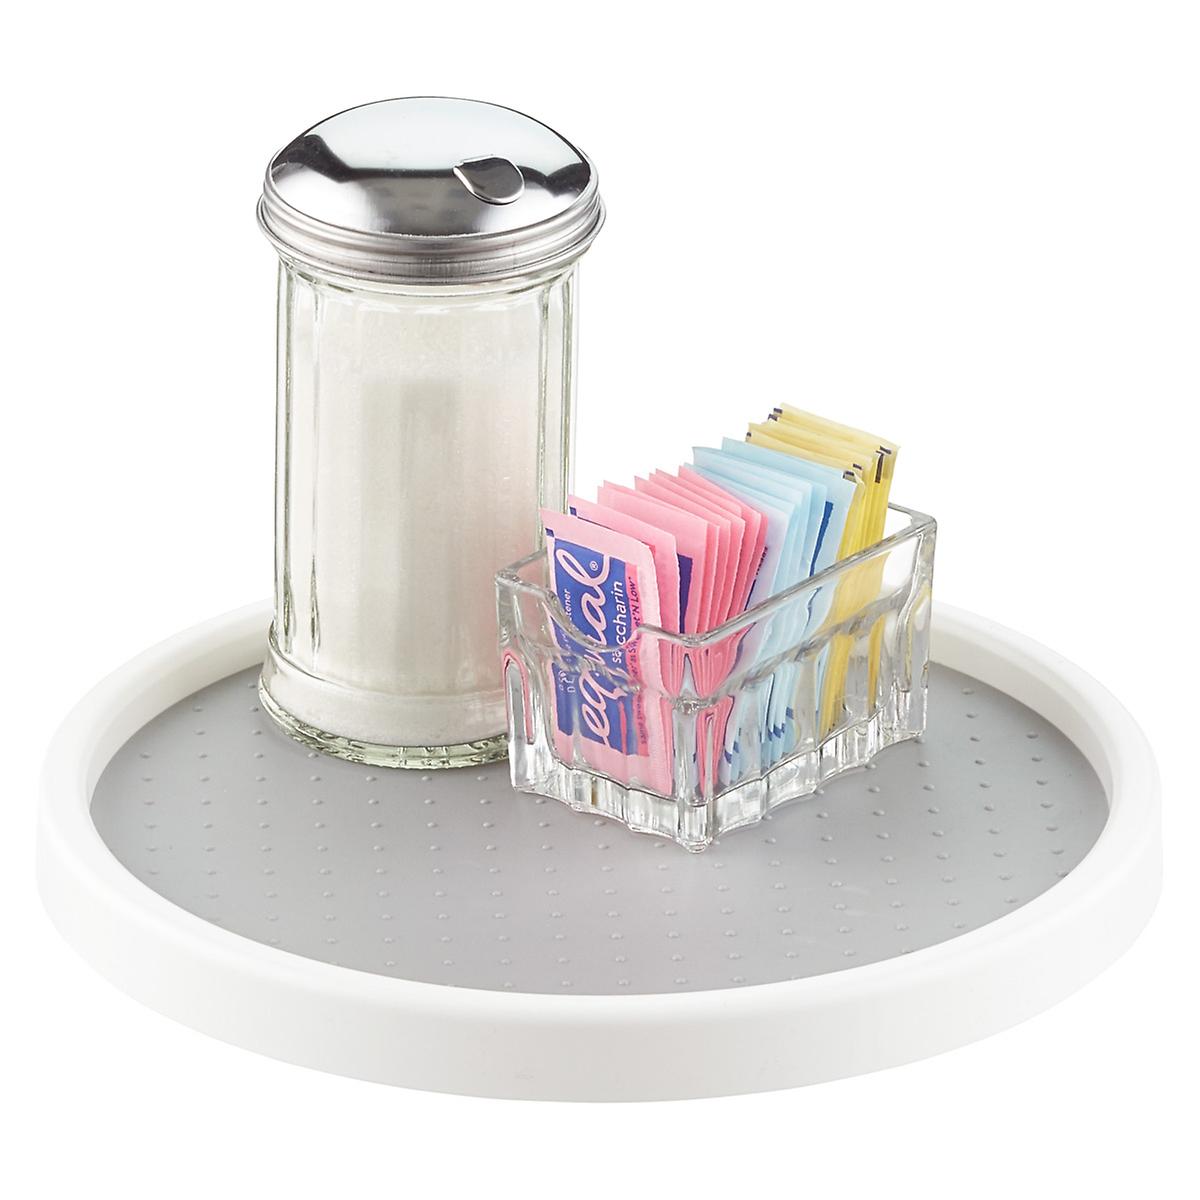 Madesmart White Lazy Susan The Container Store